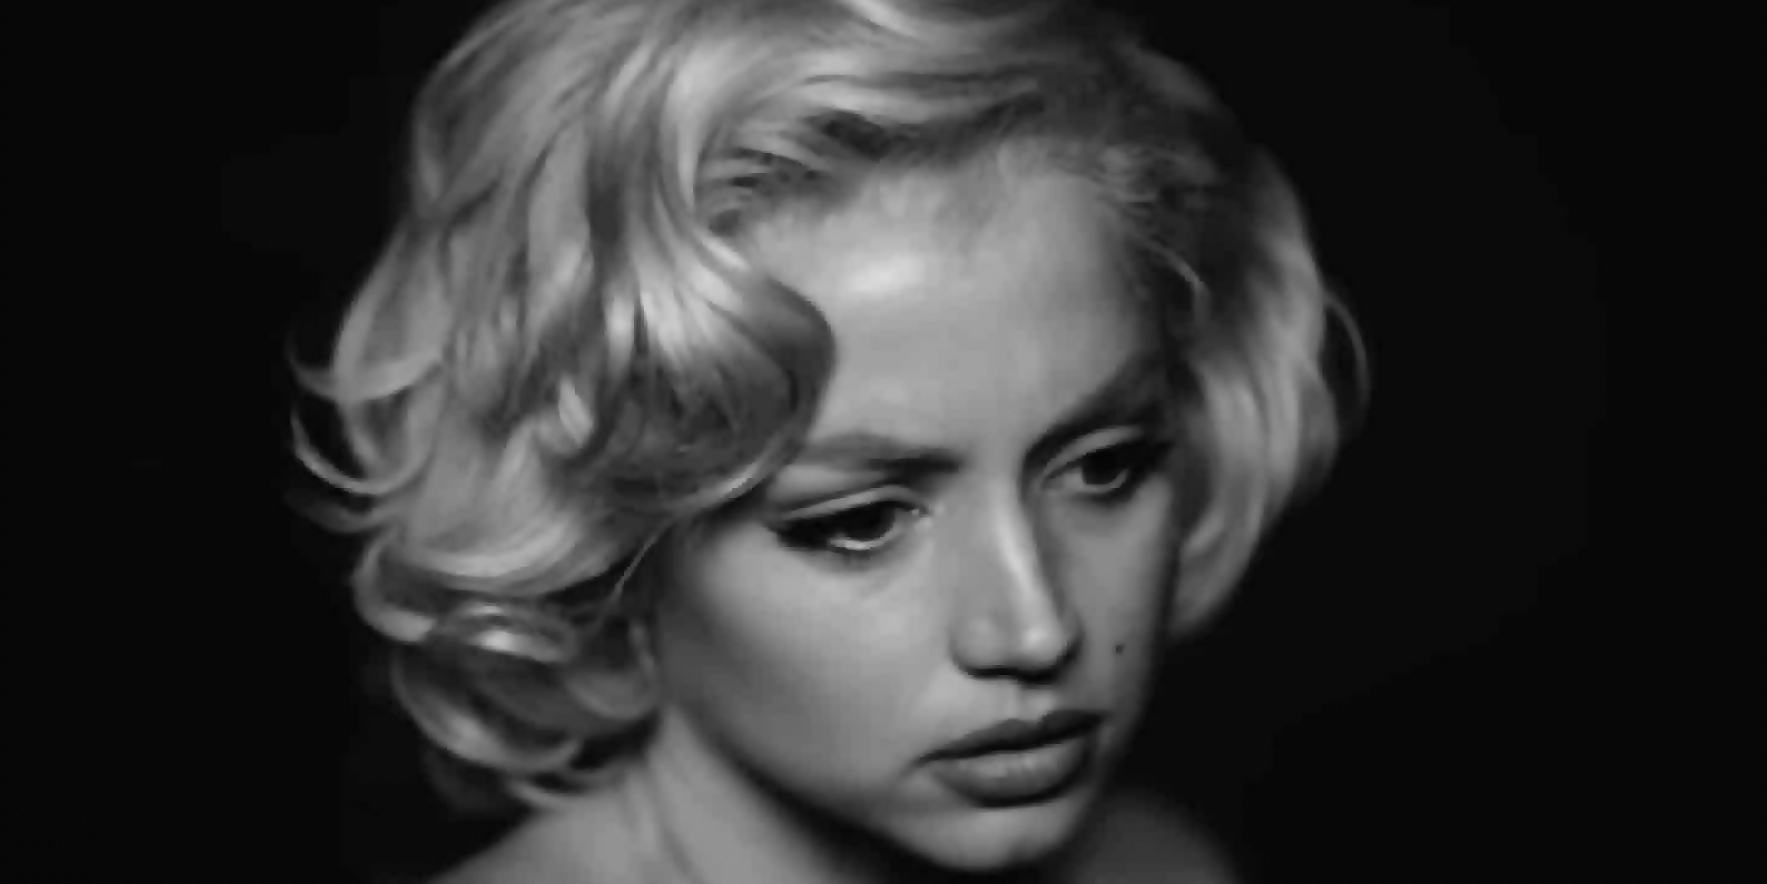 Blonde': Is the New Marilyn Monroe Movie an Antiabortion Fever Dream?